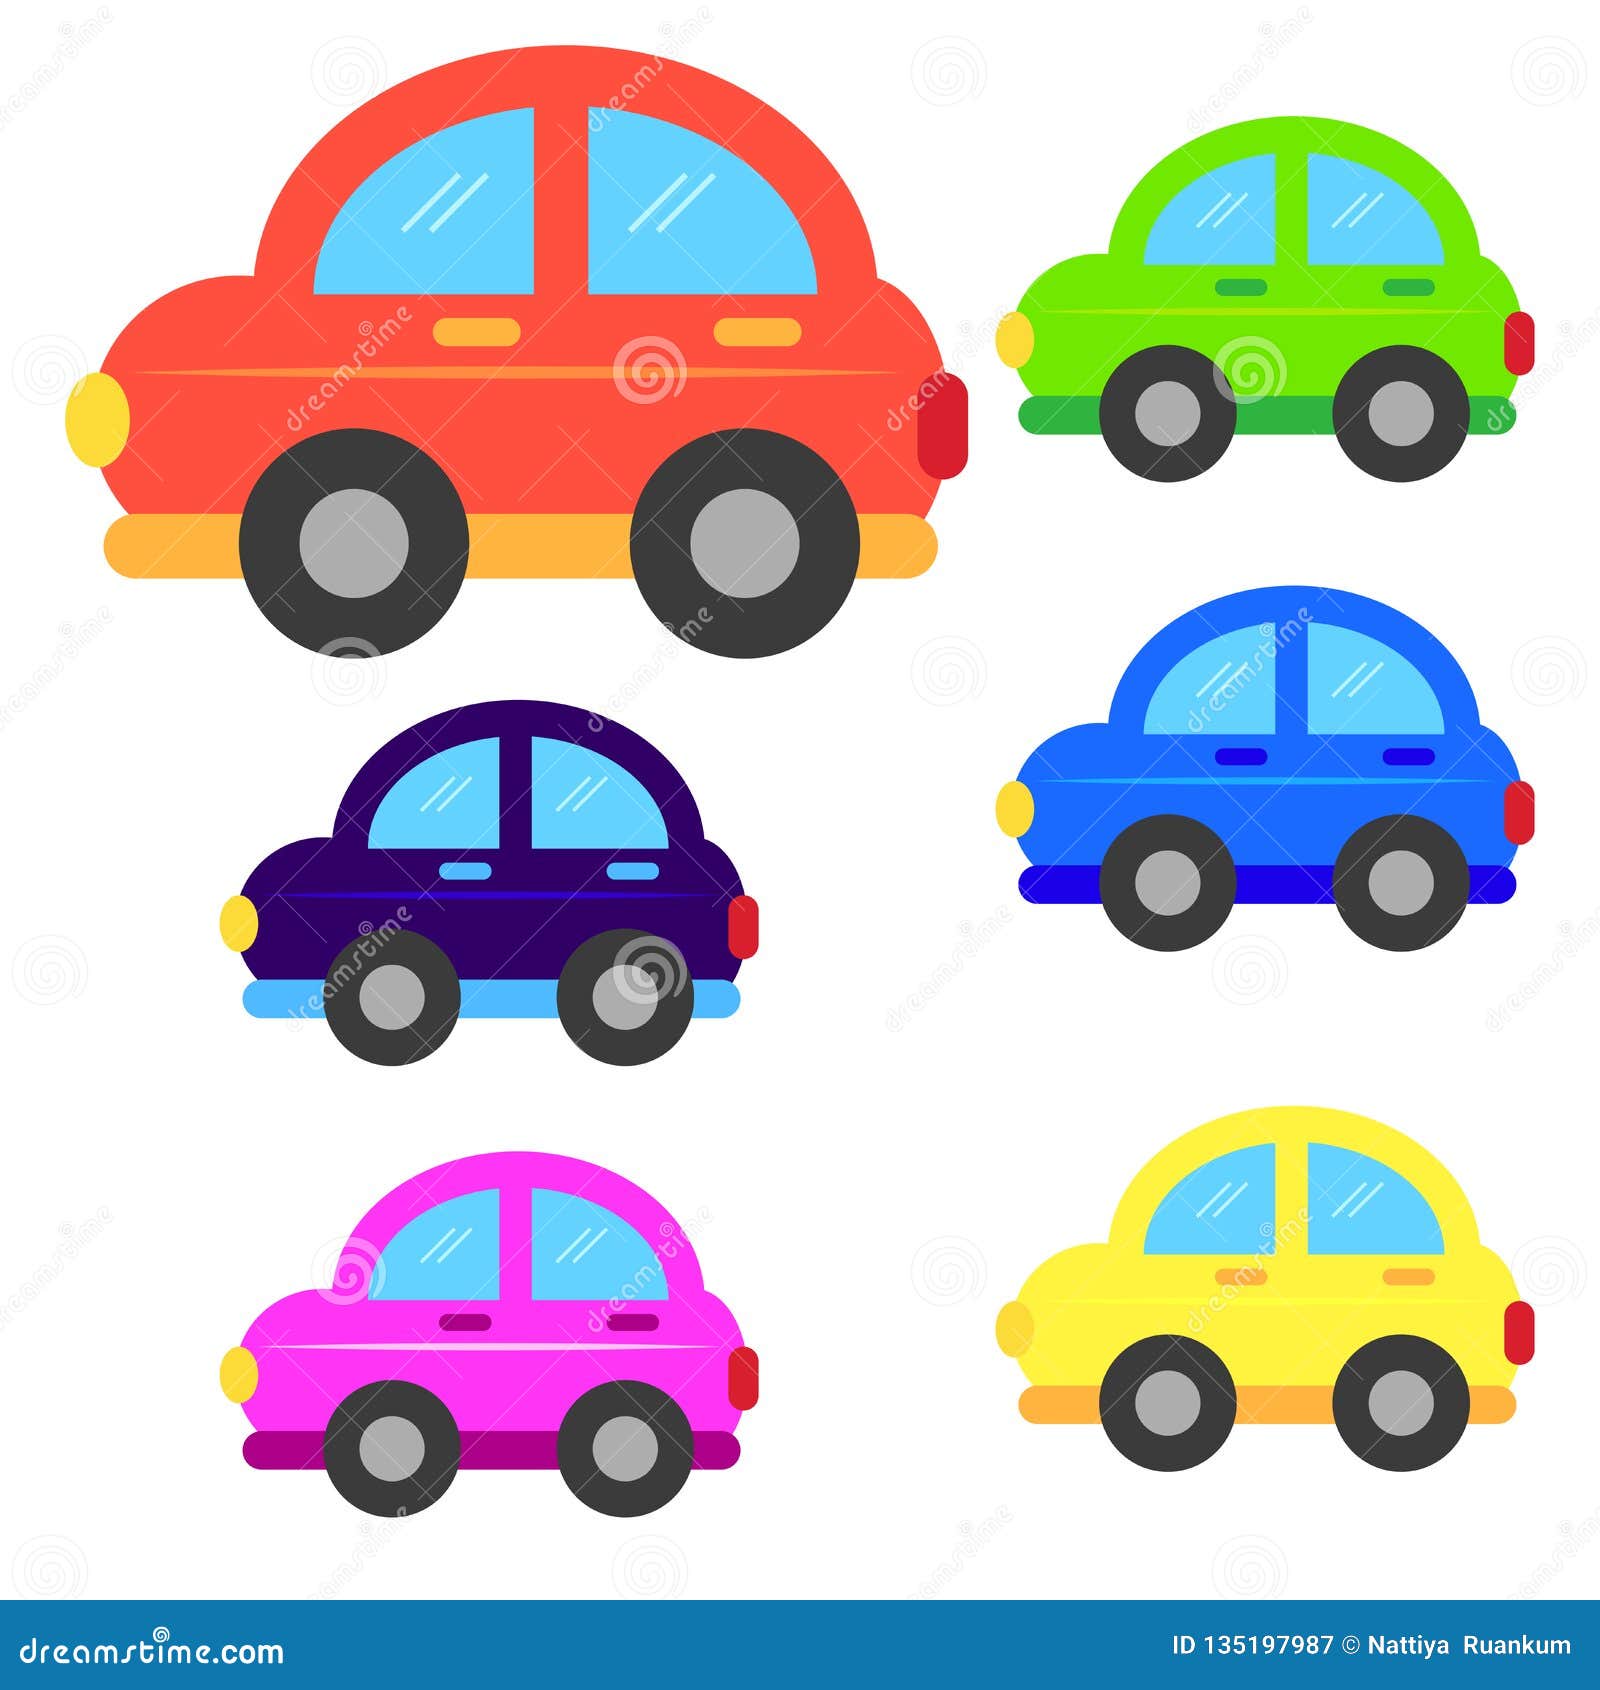 Car Cartoon or Car Clipart Cartoon Isolated on White Background Stock  Vector - Illustration of graphic, animal: 135197987